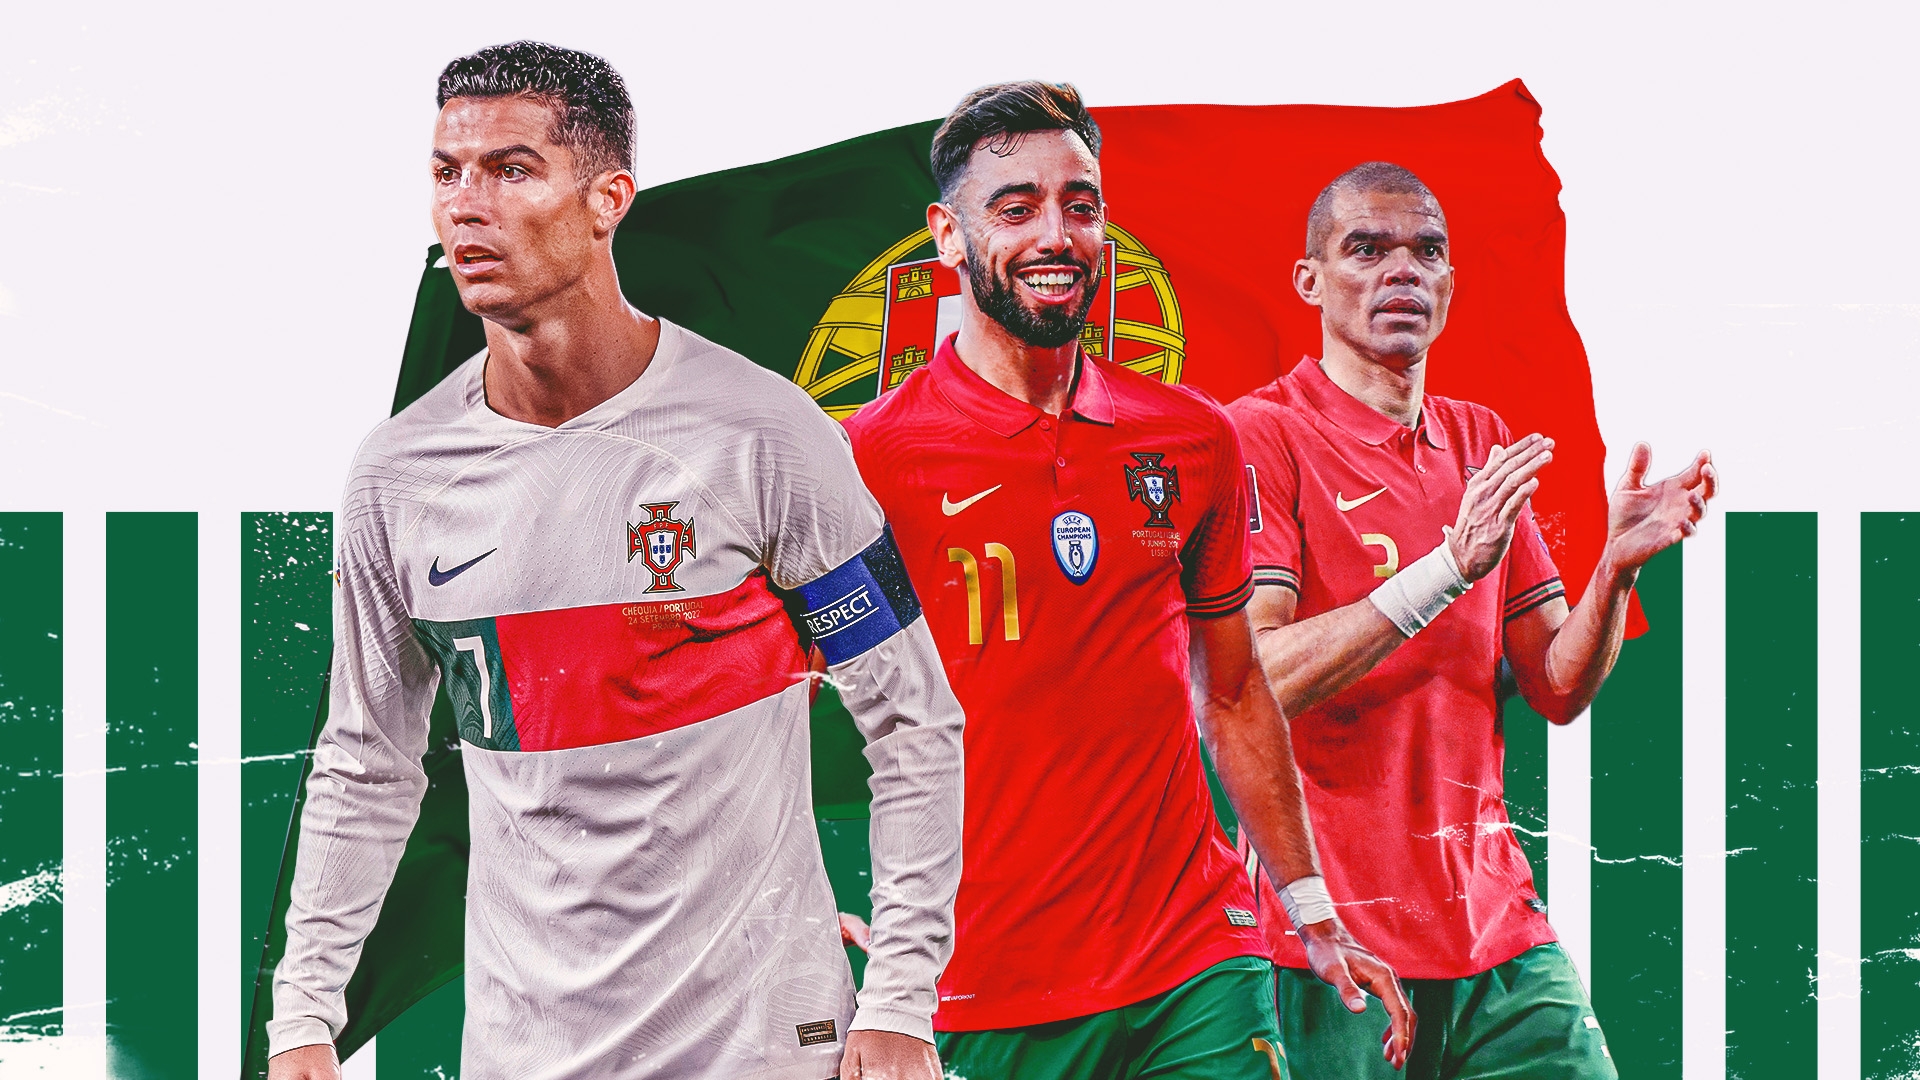 Portugal World Cup 2022 squad: Who's in and who's out?